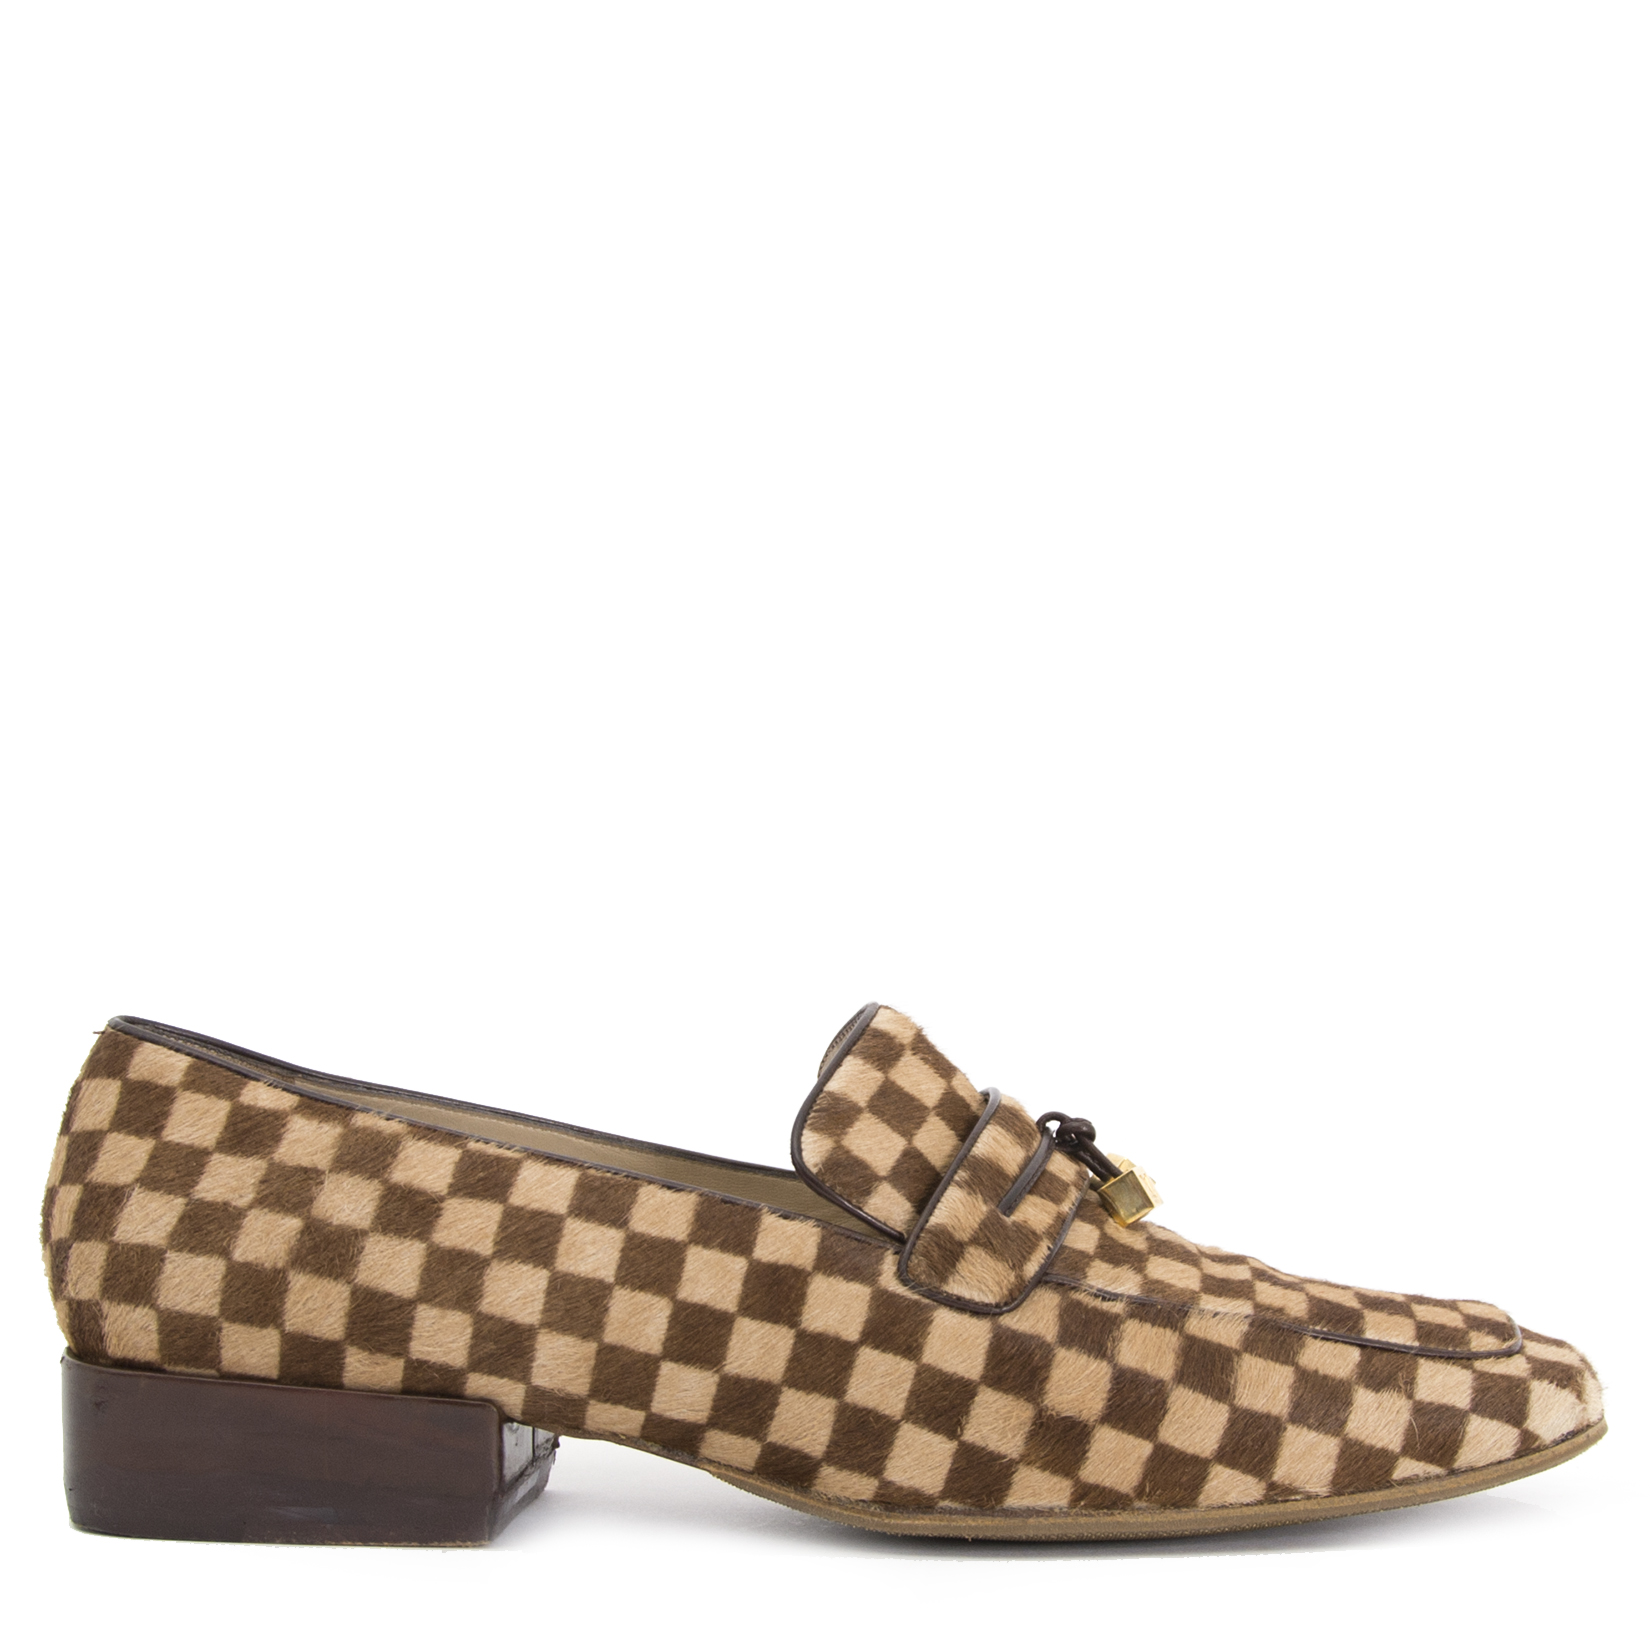 Sold at Auction: A Desirable Pair of Louis Vuitton Damier Ponyhair